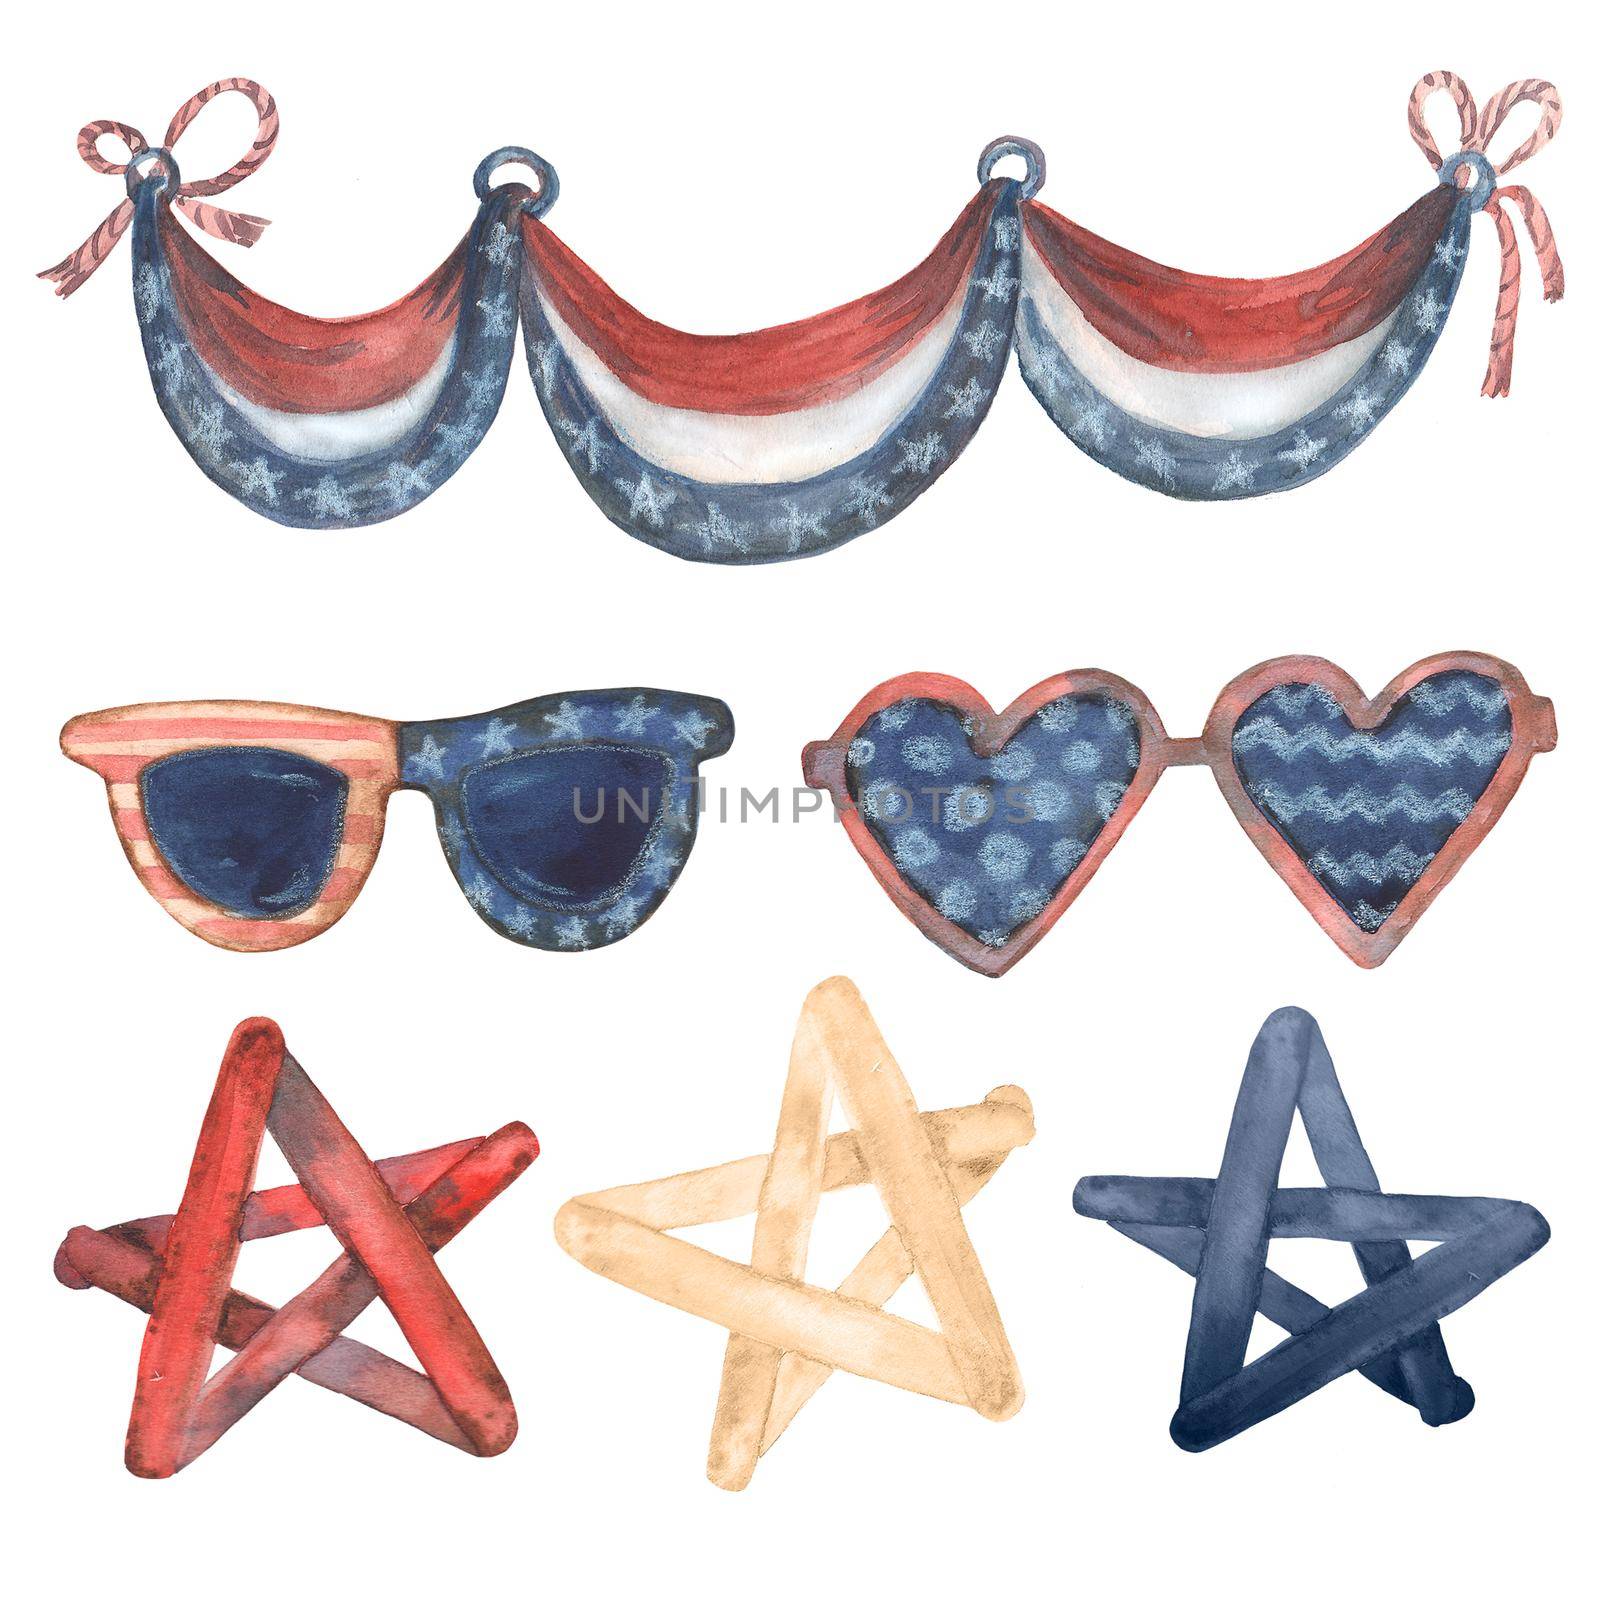 Watercolor hand-made illustrations 4th of July Clipart USA American Flag. Set of elements in Patriotic style Stars and Stripes Red and blue colors White background Overlay for Scrapbook Graphic Design